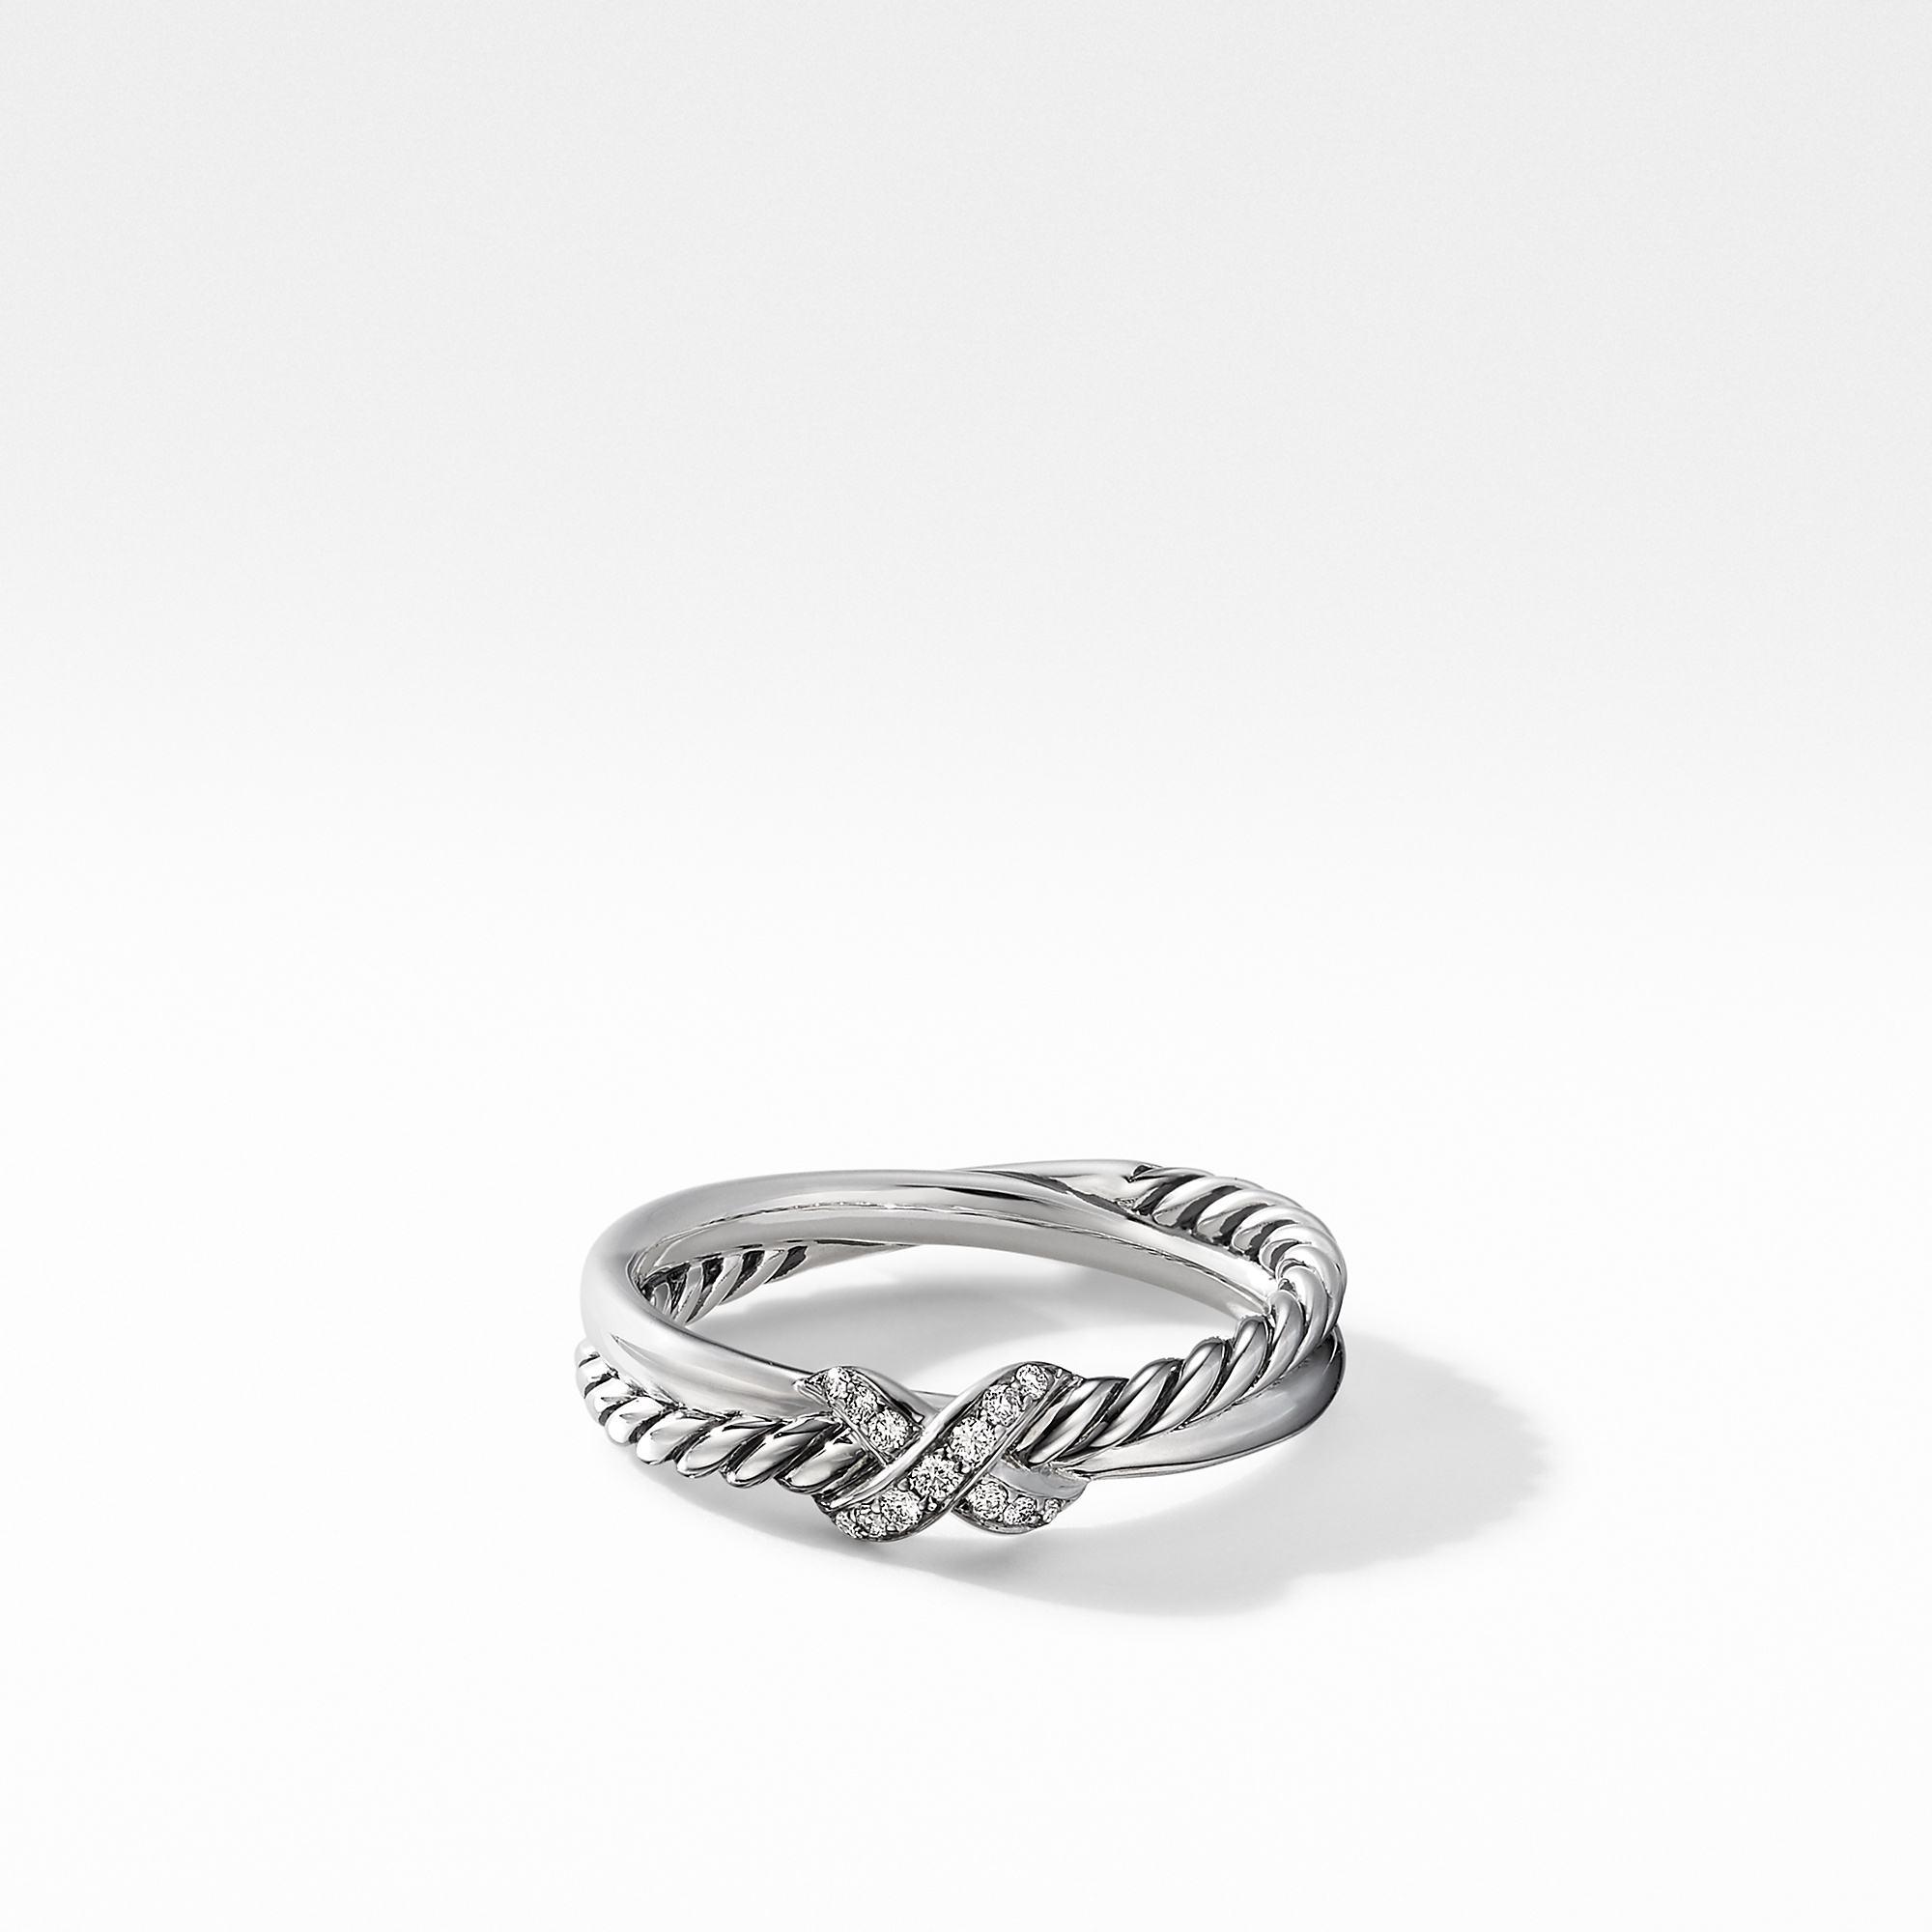 David Yurman Petite X Crossover Ring in Sterling Silver with Pave Diamonds, size 6